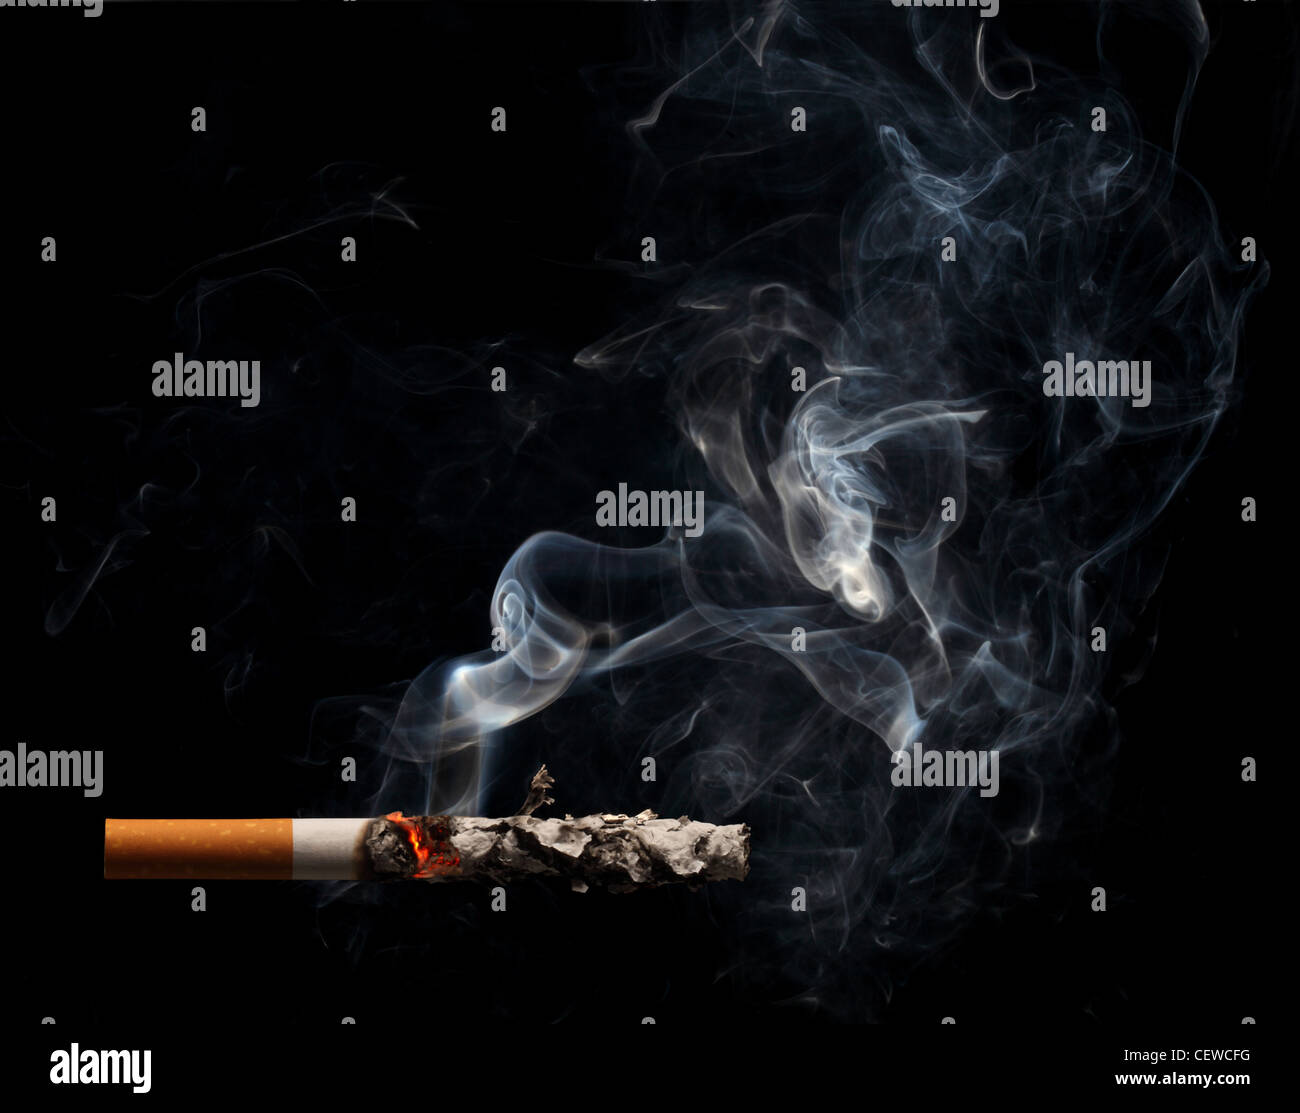 A burning and smoking cigarette on a black background Stock Photo